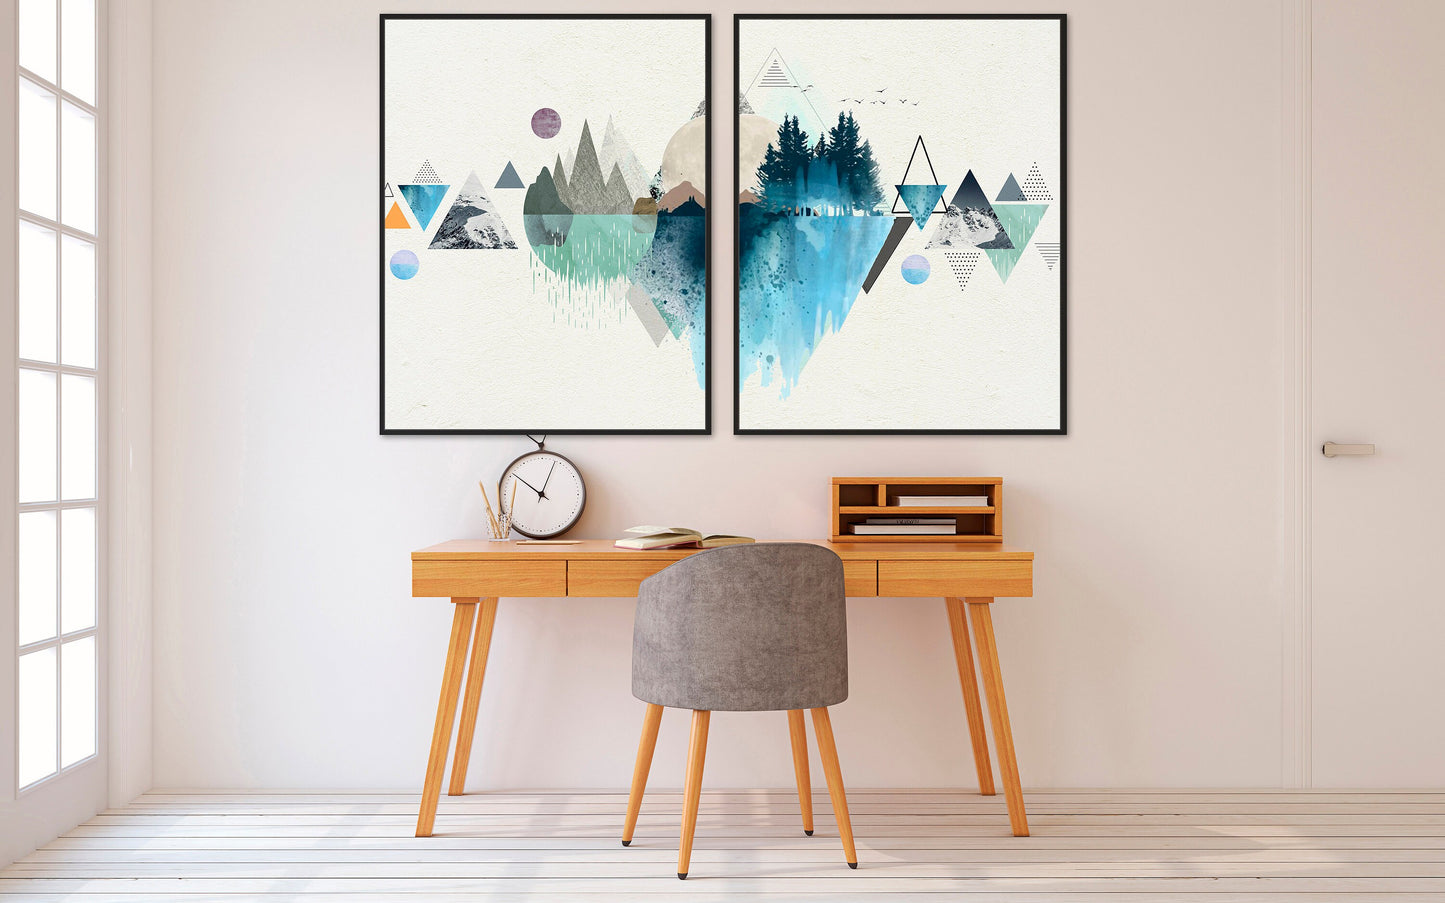 Abstract modern blue geometric framed wall art, large canvas printable artwork with abstract mountains, black frame multi panel canvas art